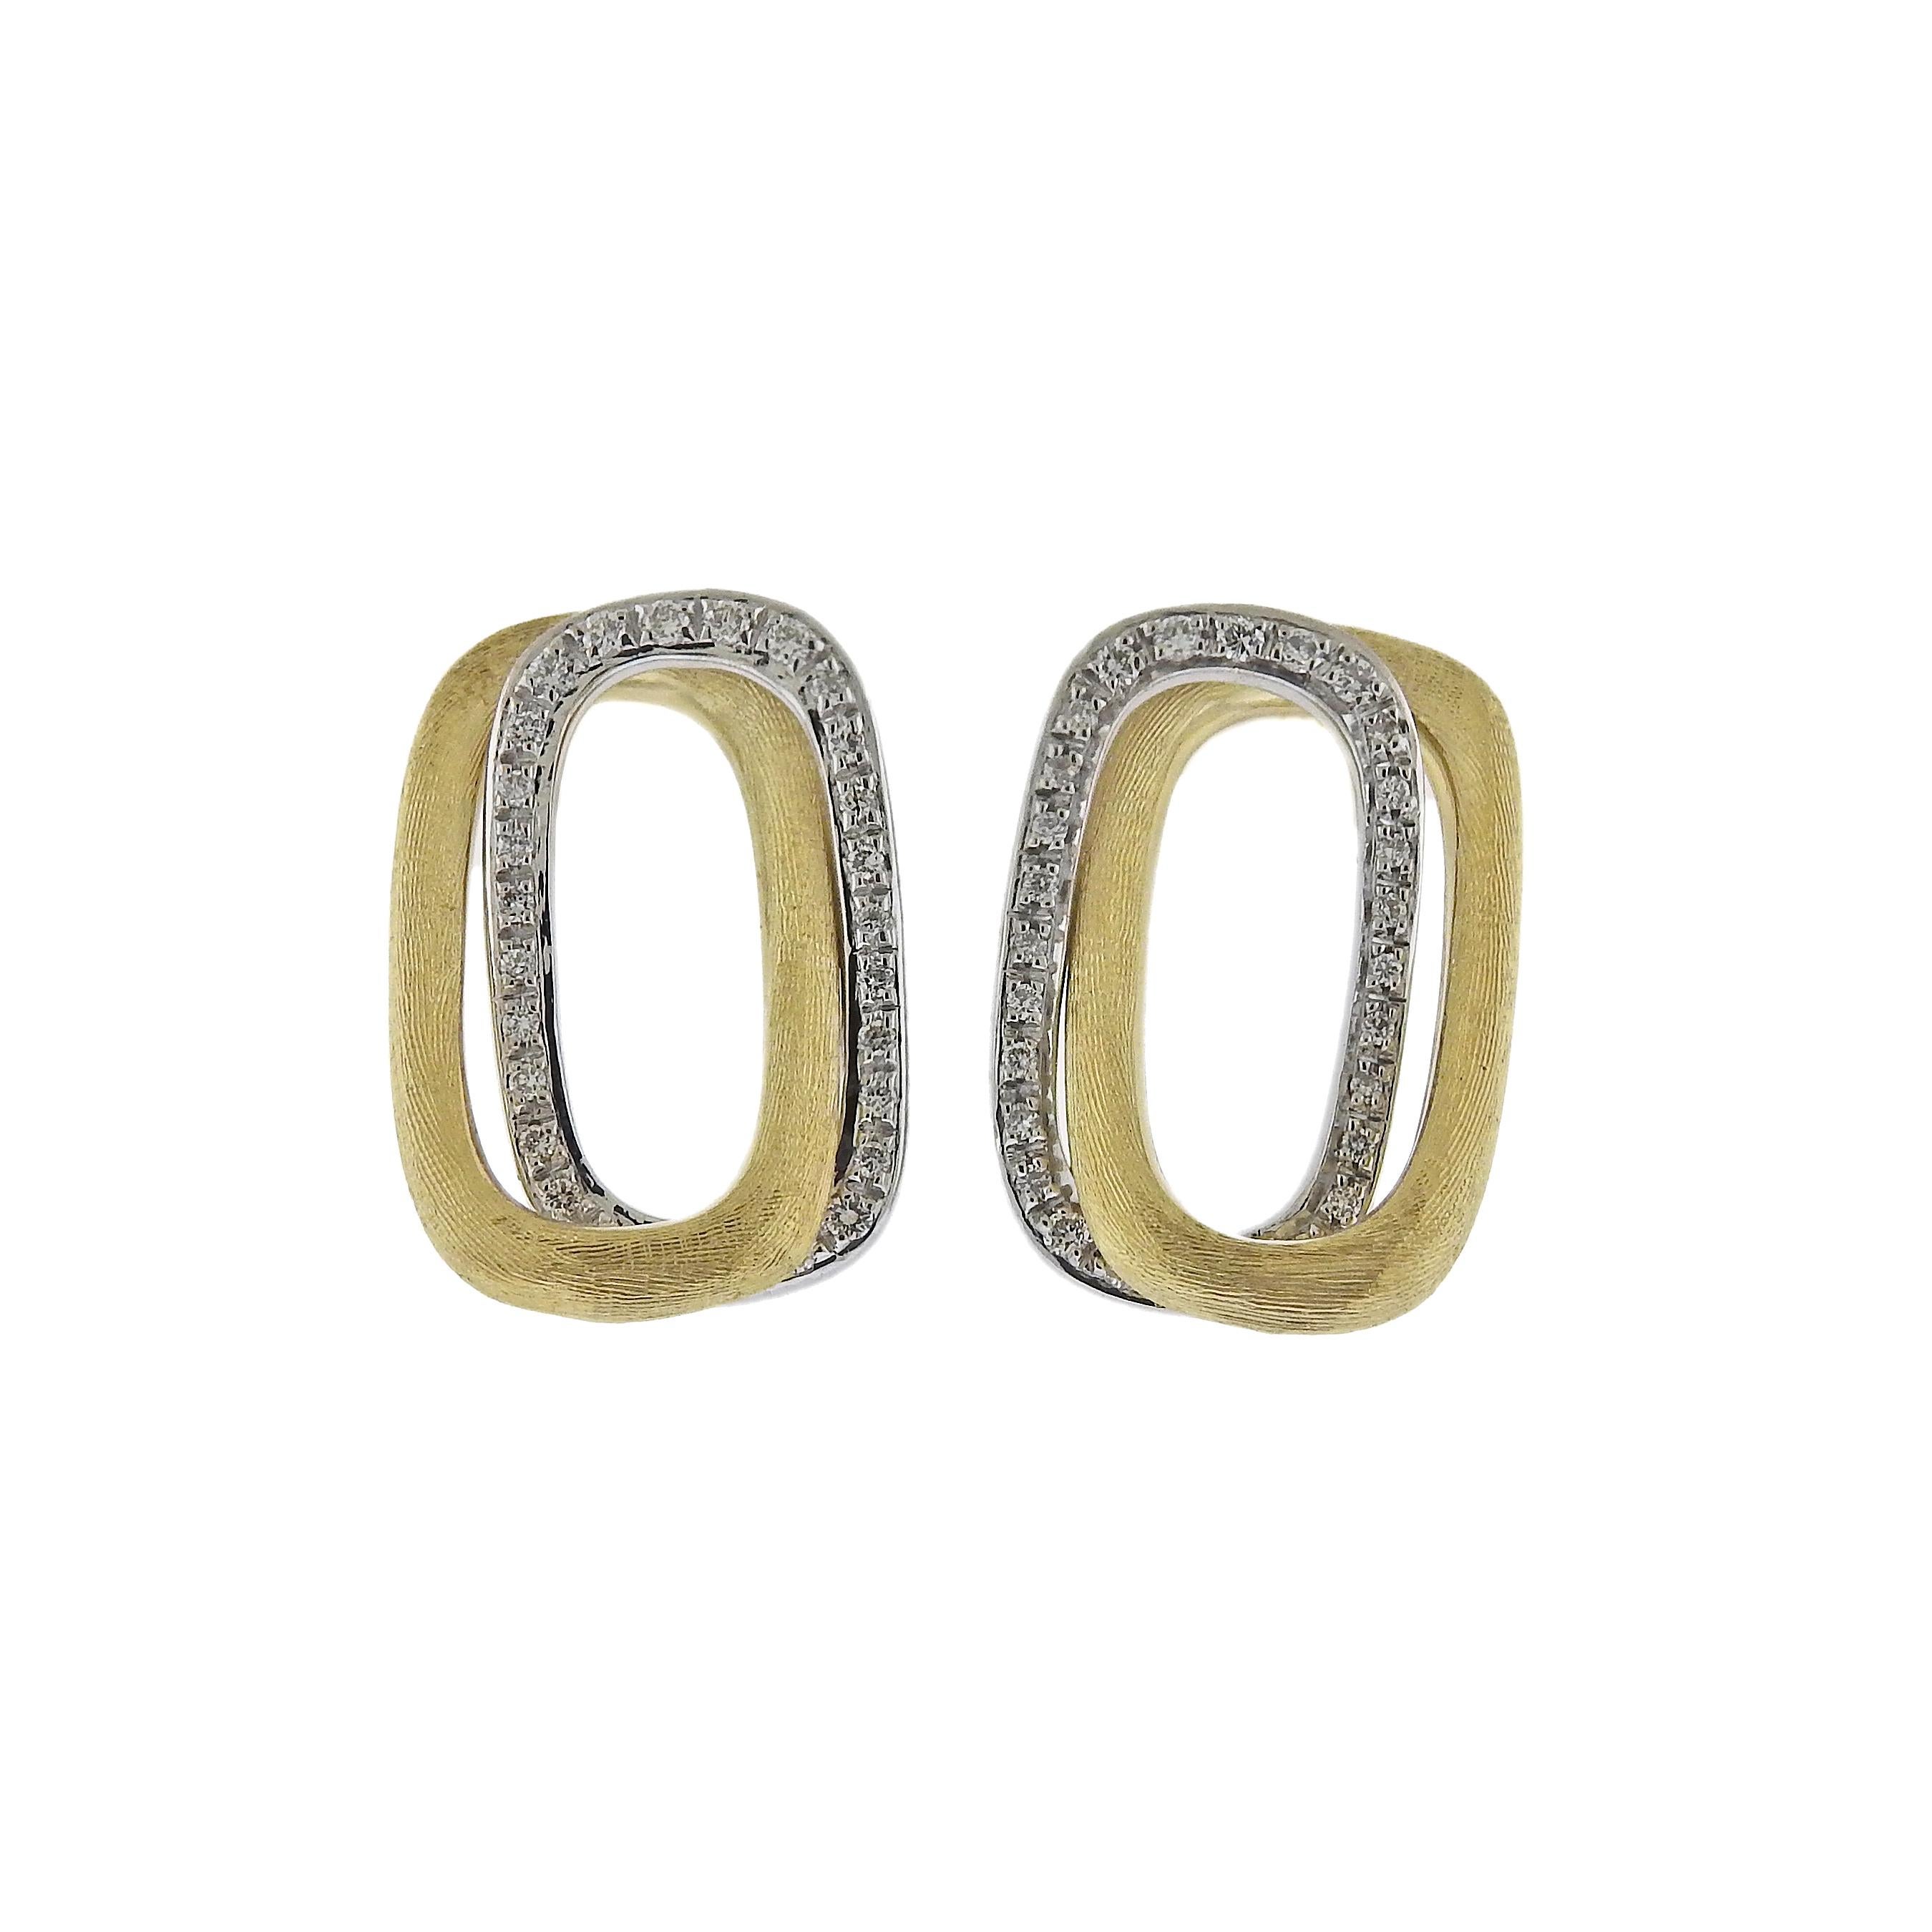 Marco Bicego Murano collection 18K yellow and white gold, interlocking link stud earrings, set with 0.33ctw of VS/G-H diamonds. Earrings measure 30mm x 24mm. Marked: Marco Bicego, Made in Italy, Italian mark, 750. Weight is 6.3 grams. Retail Value